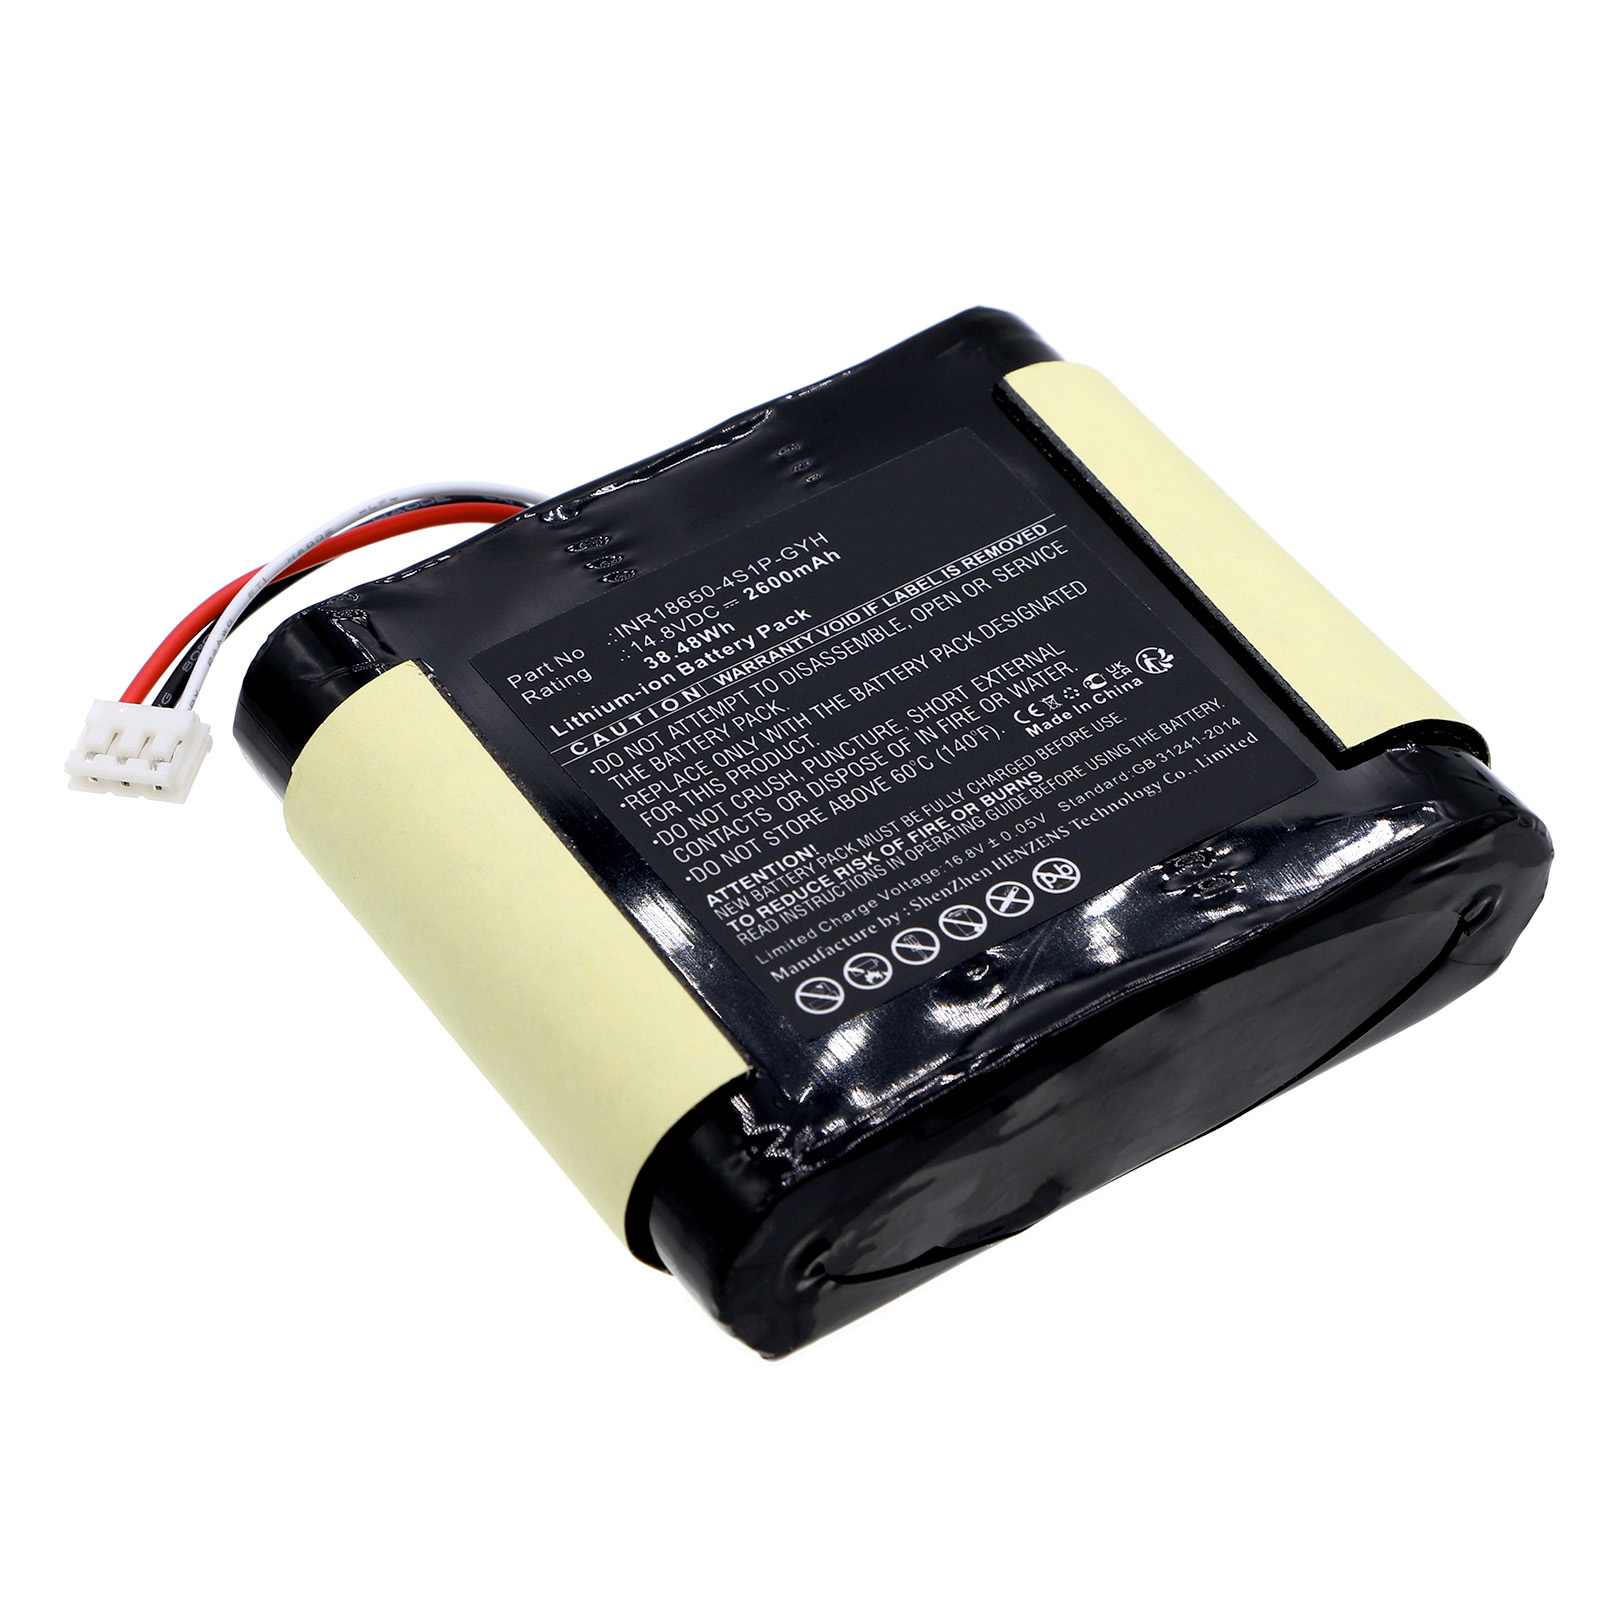 Synergy Digital Speaker Battery, Compatible with Libratone INR18650-4S1P-GYH Speaker Battery (Li-ion, 14.8V, 2600mAh)